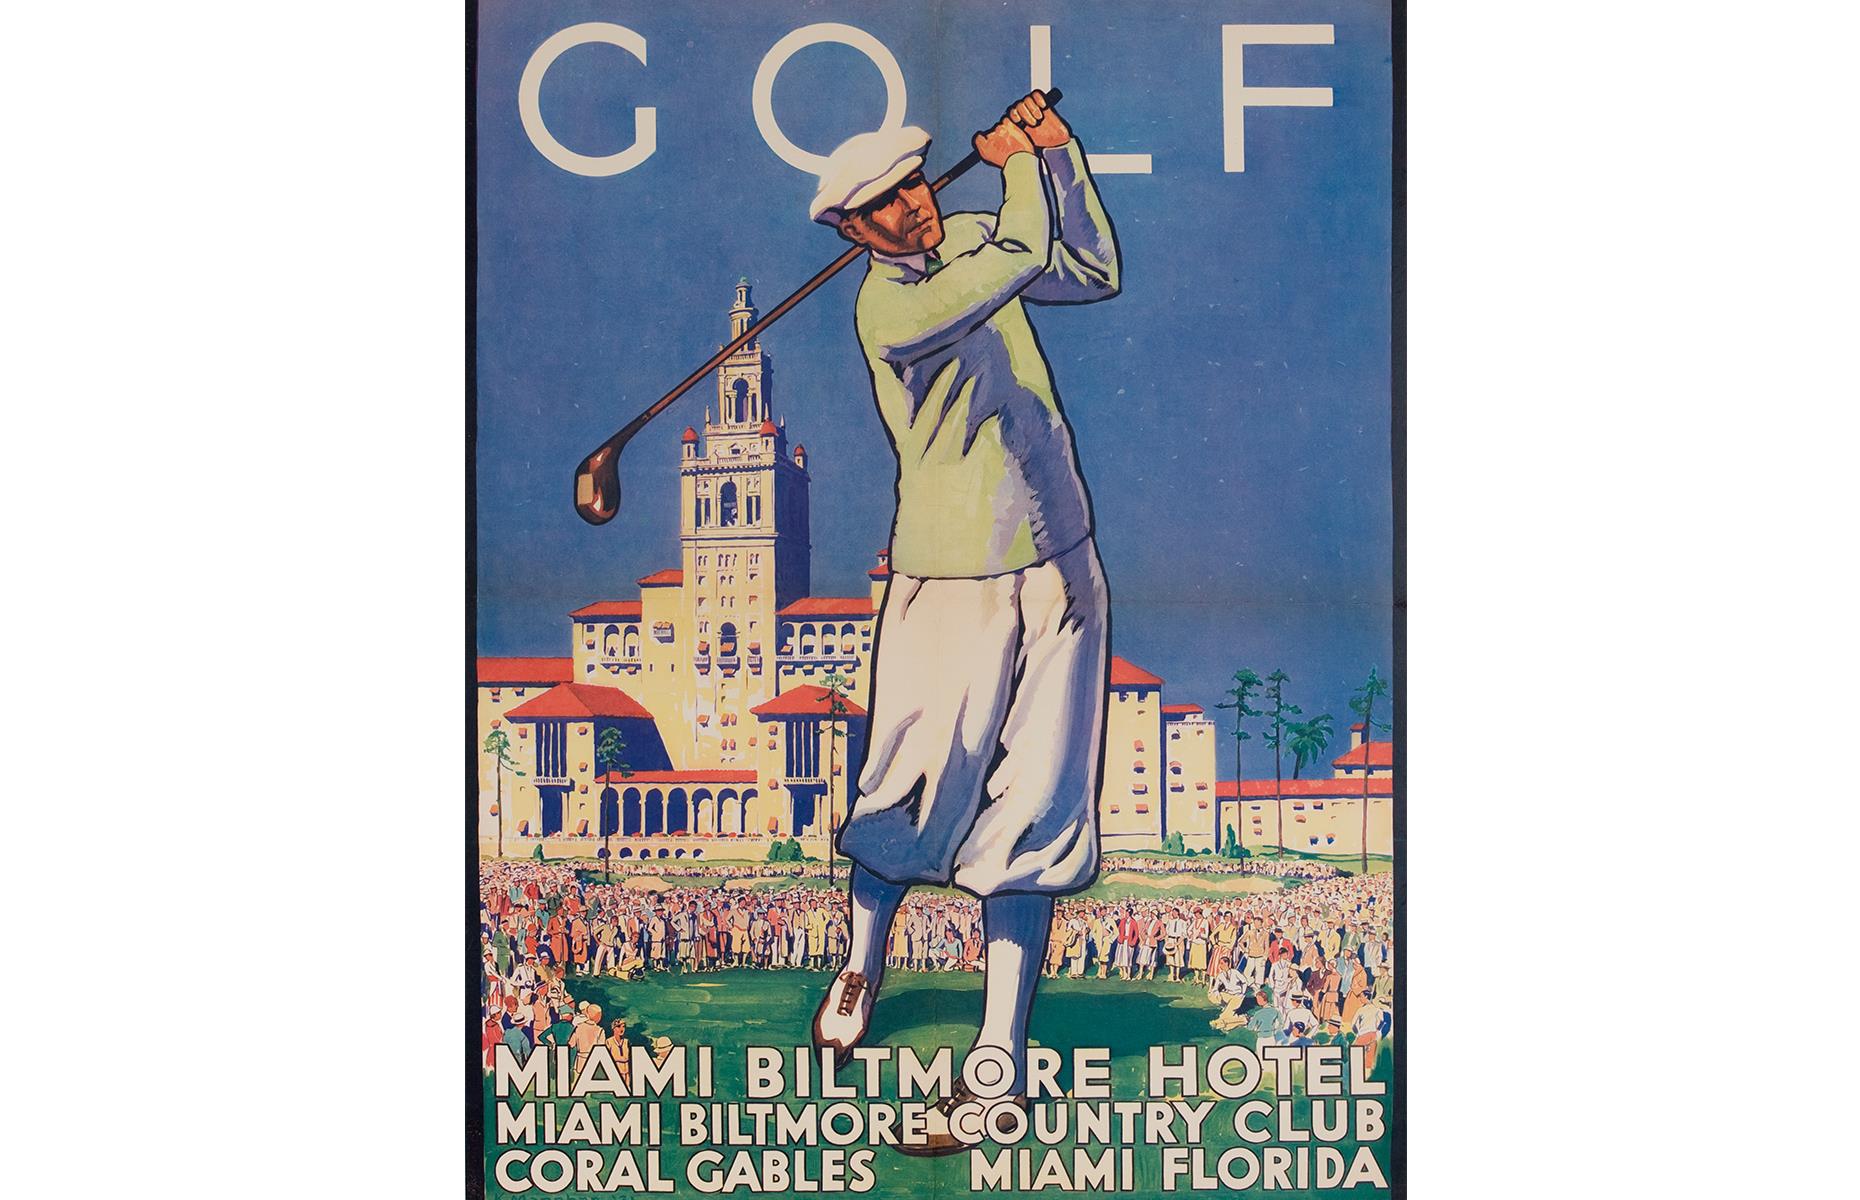 Miami's sumptuous Biltmore Hotel was built in the Roaring Twenties and it's captured in all its luxurious glory in this advert from the 1930s. The poster's centerpiece is a golfer teeing off before a crowd, but the real jewel is the hotel itself. It makes a beautiful backdrop, with its striking tower (inspired by La Giralda in Seville) rising up behind the scene.